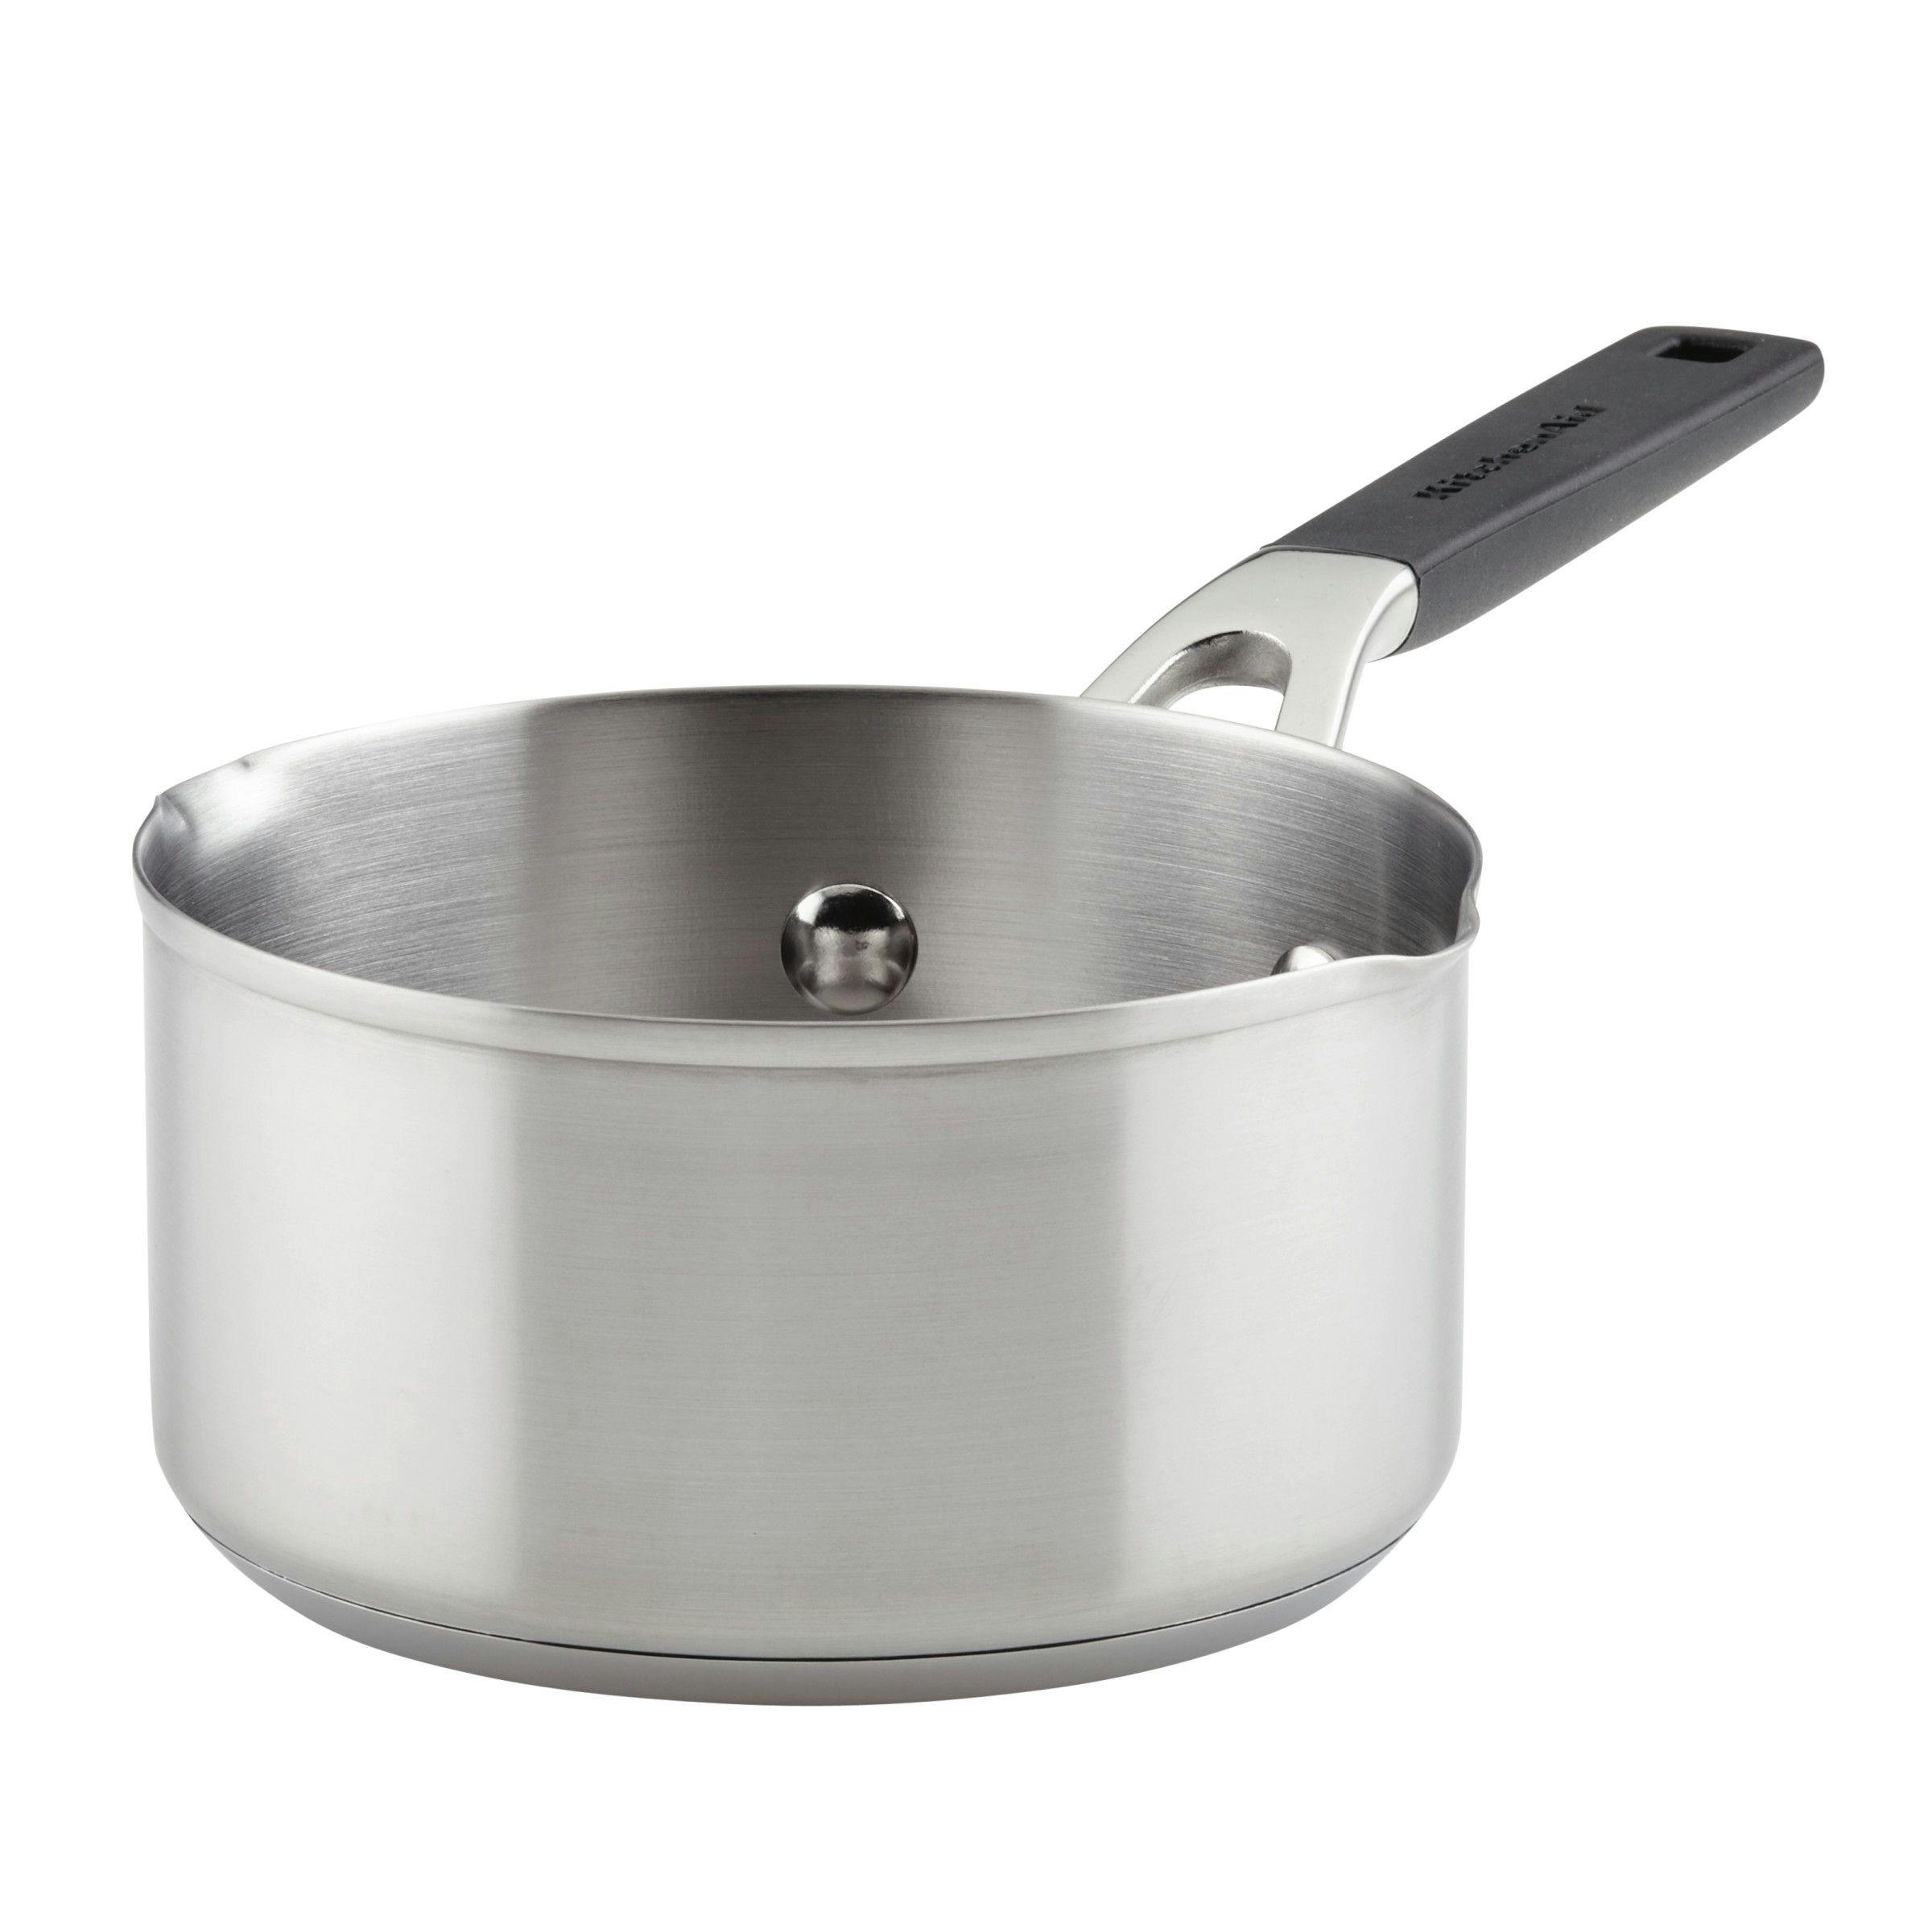 KitchenAid Stainless Steel Induction Saucepan with Pour Spouts, 1-Quart, Brushed Stainless Steel